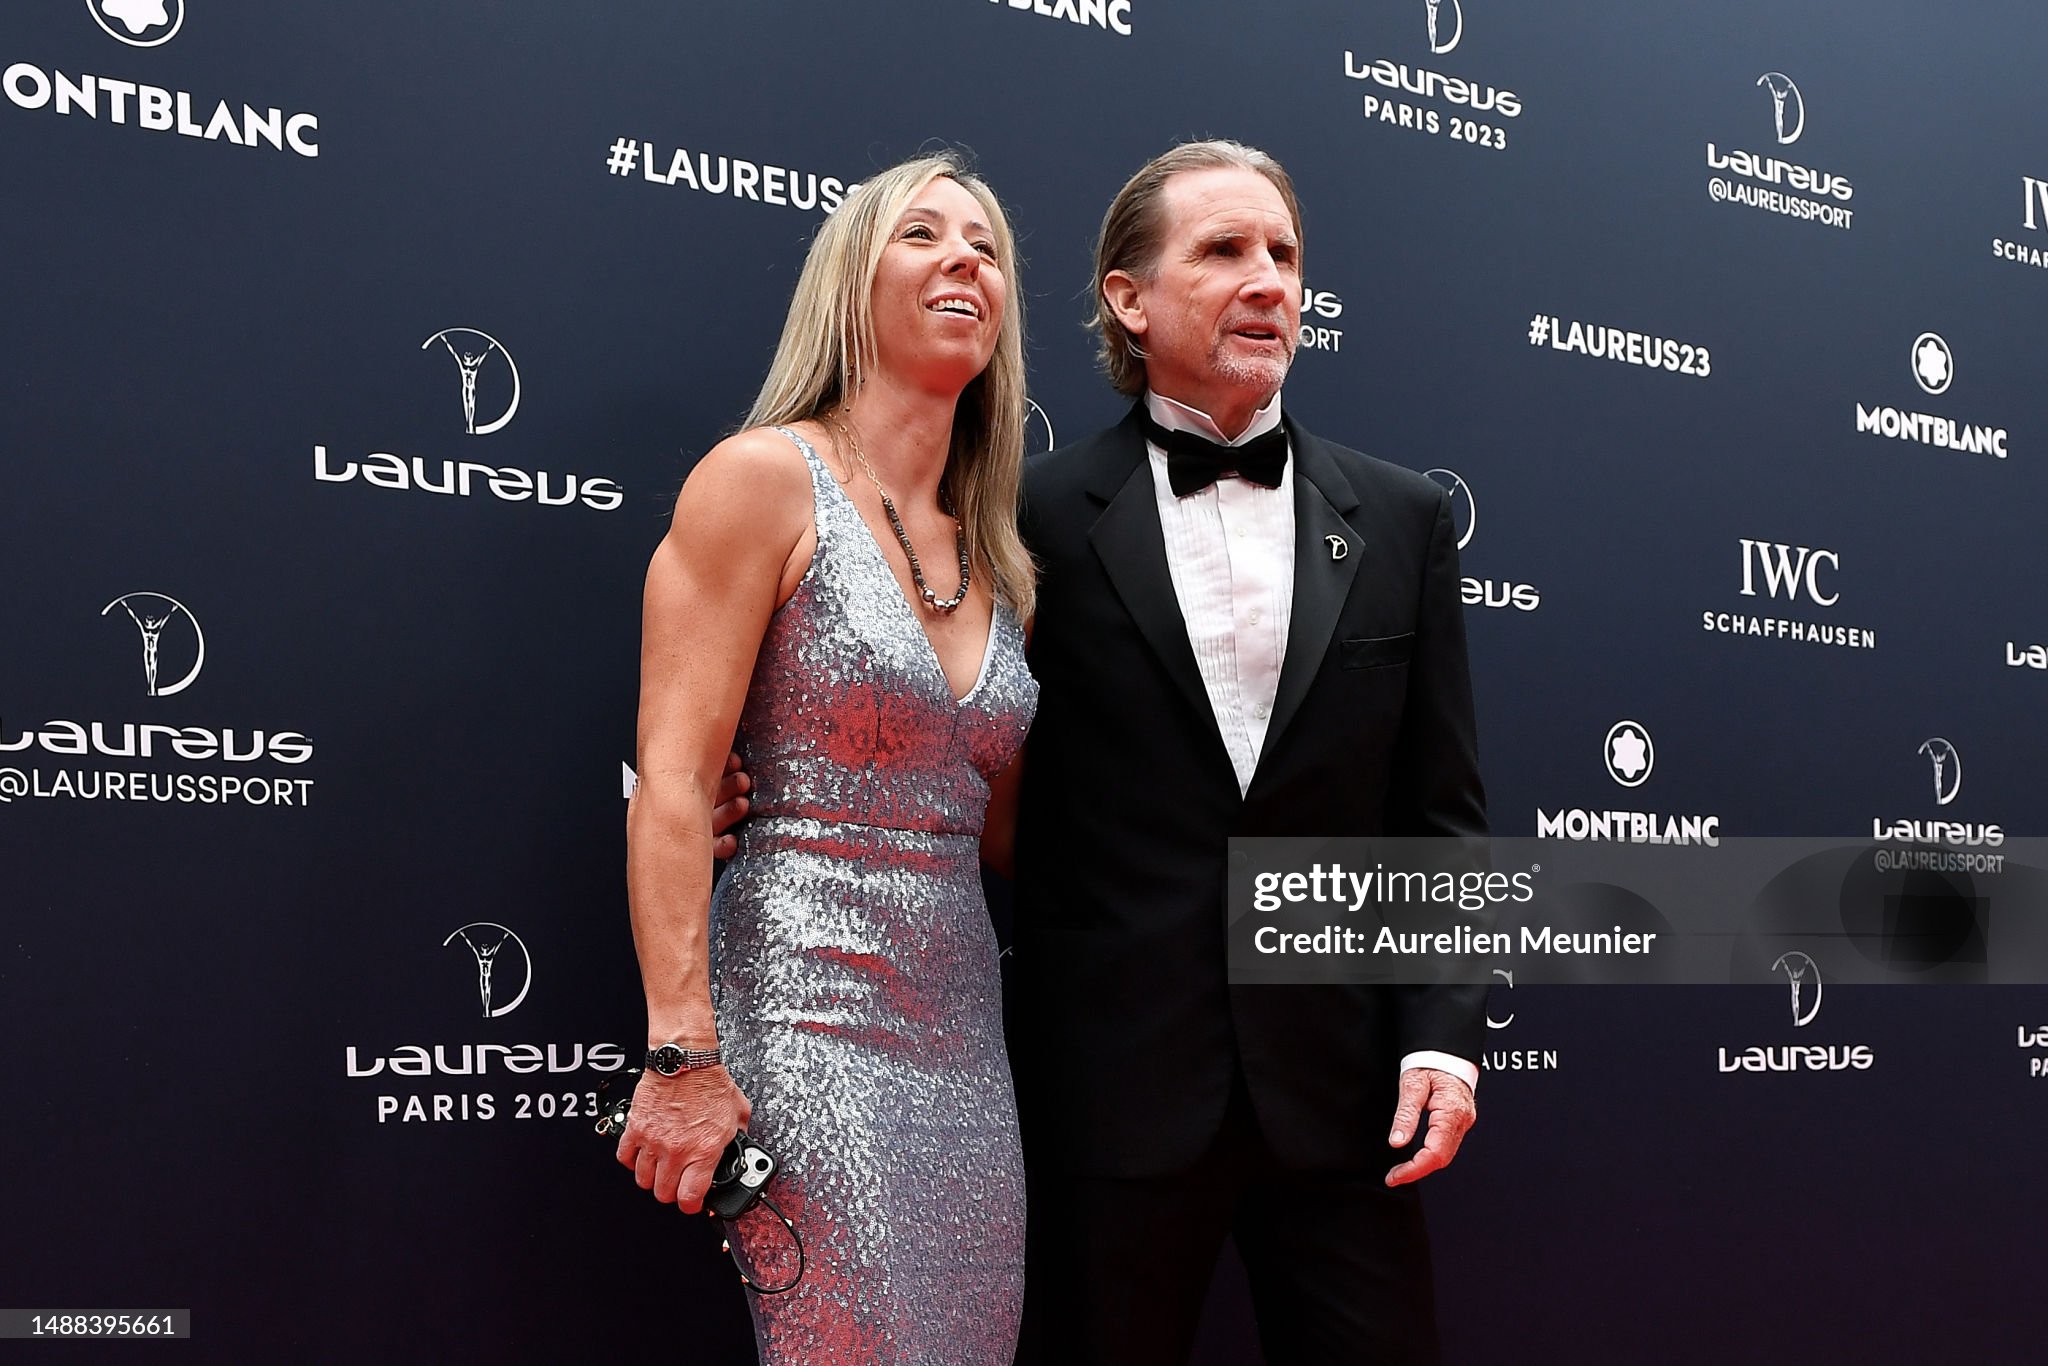 laureus-academy-member-robby-naish-and-guest-arrives-at-the-2023-laureus-world-sport-awards.jpg